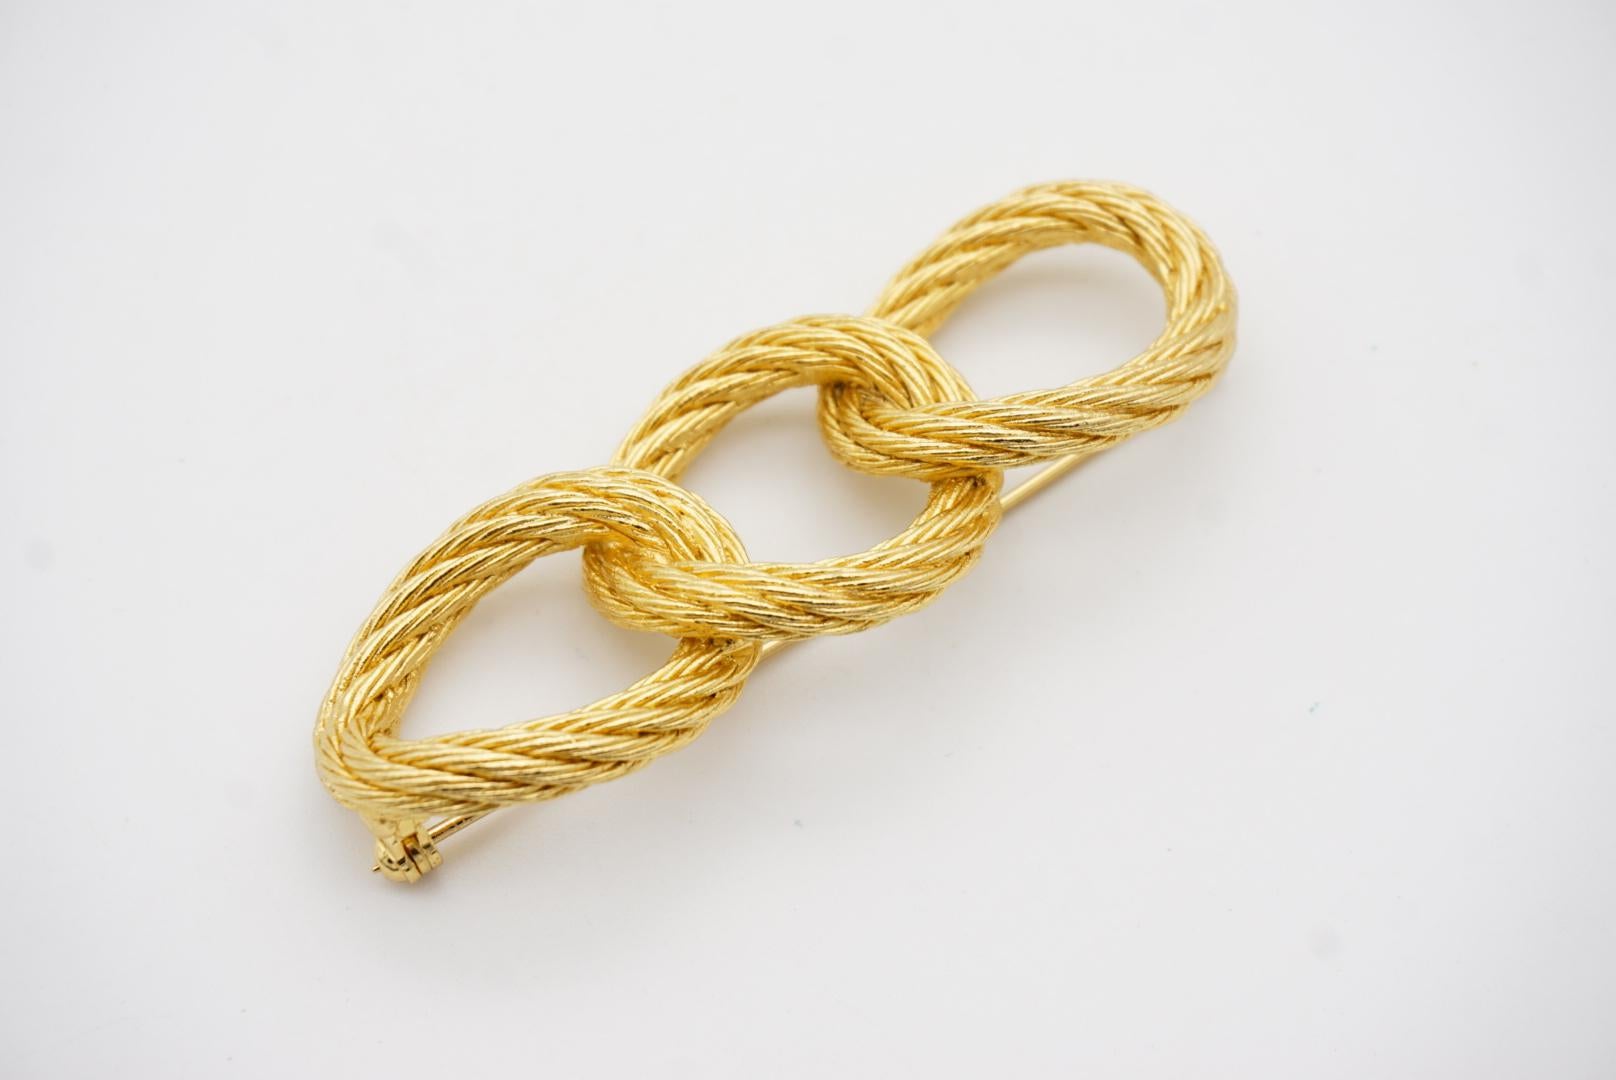 Christian Dior 1980s Vintage Large Trio Oval Interlocked Rope Twist Knot Brooch For Sale 5